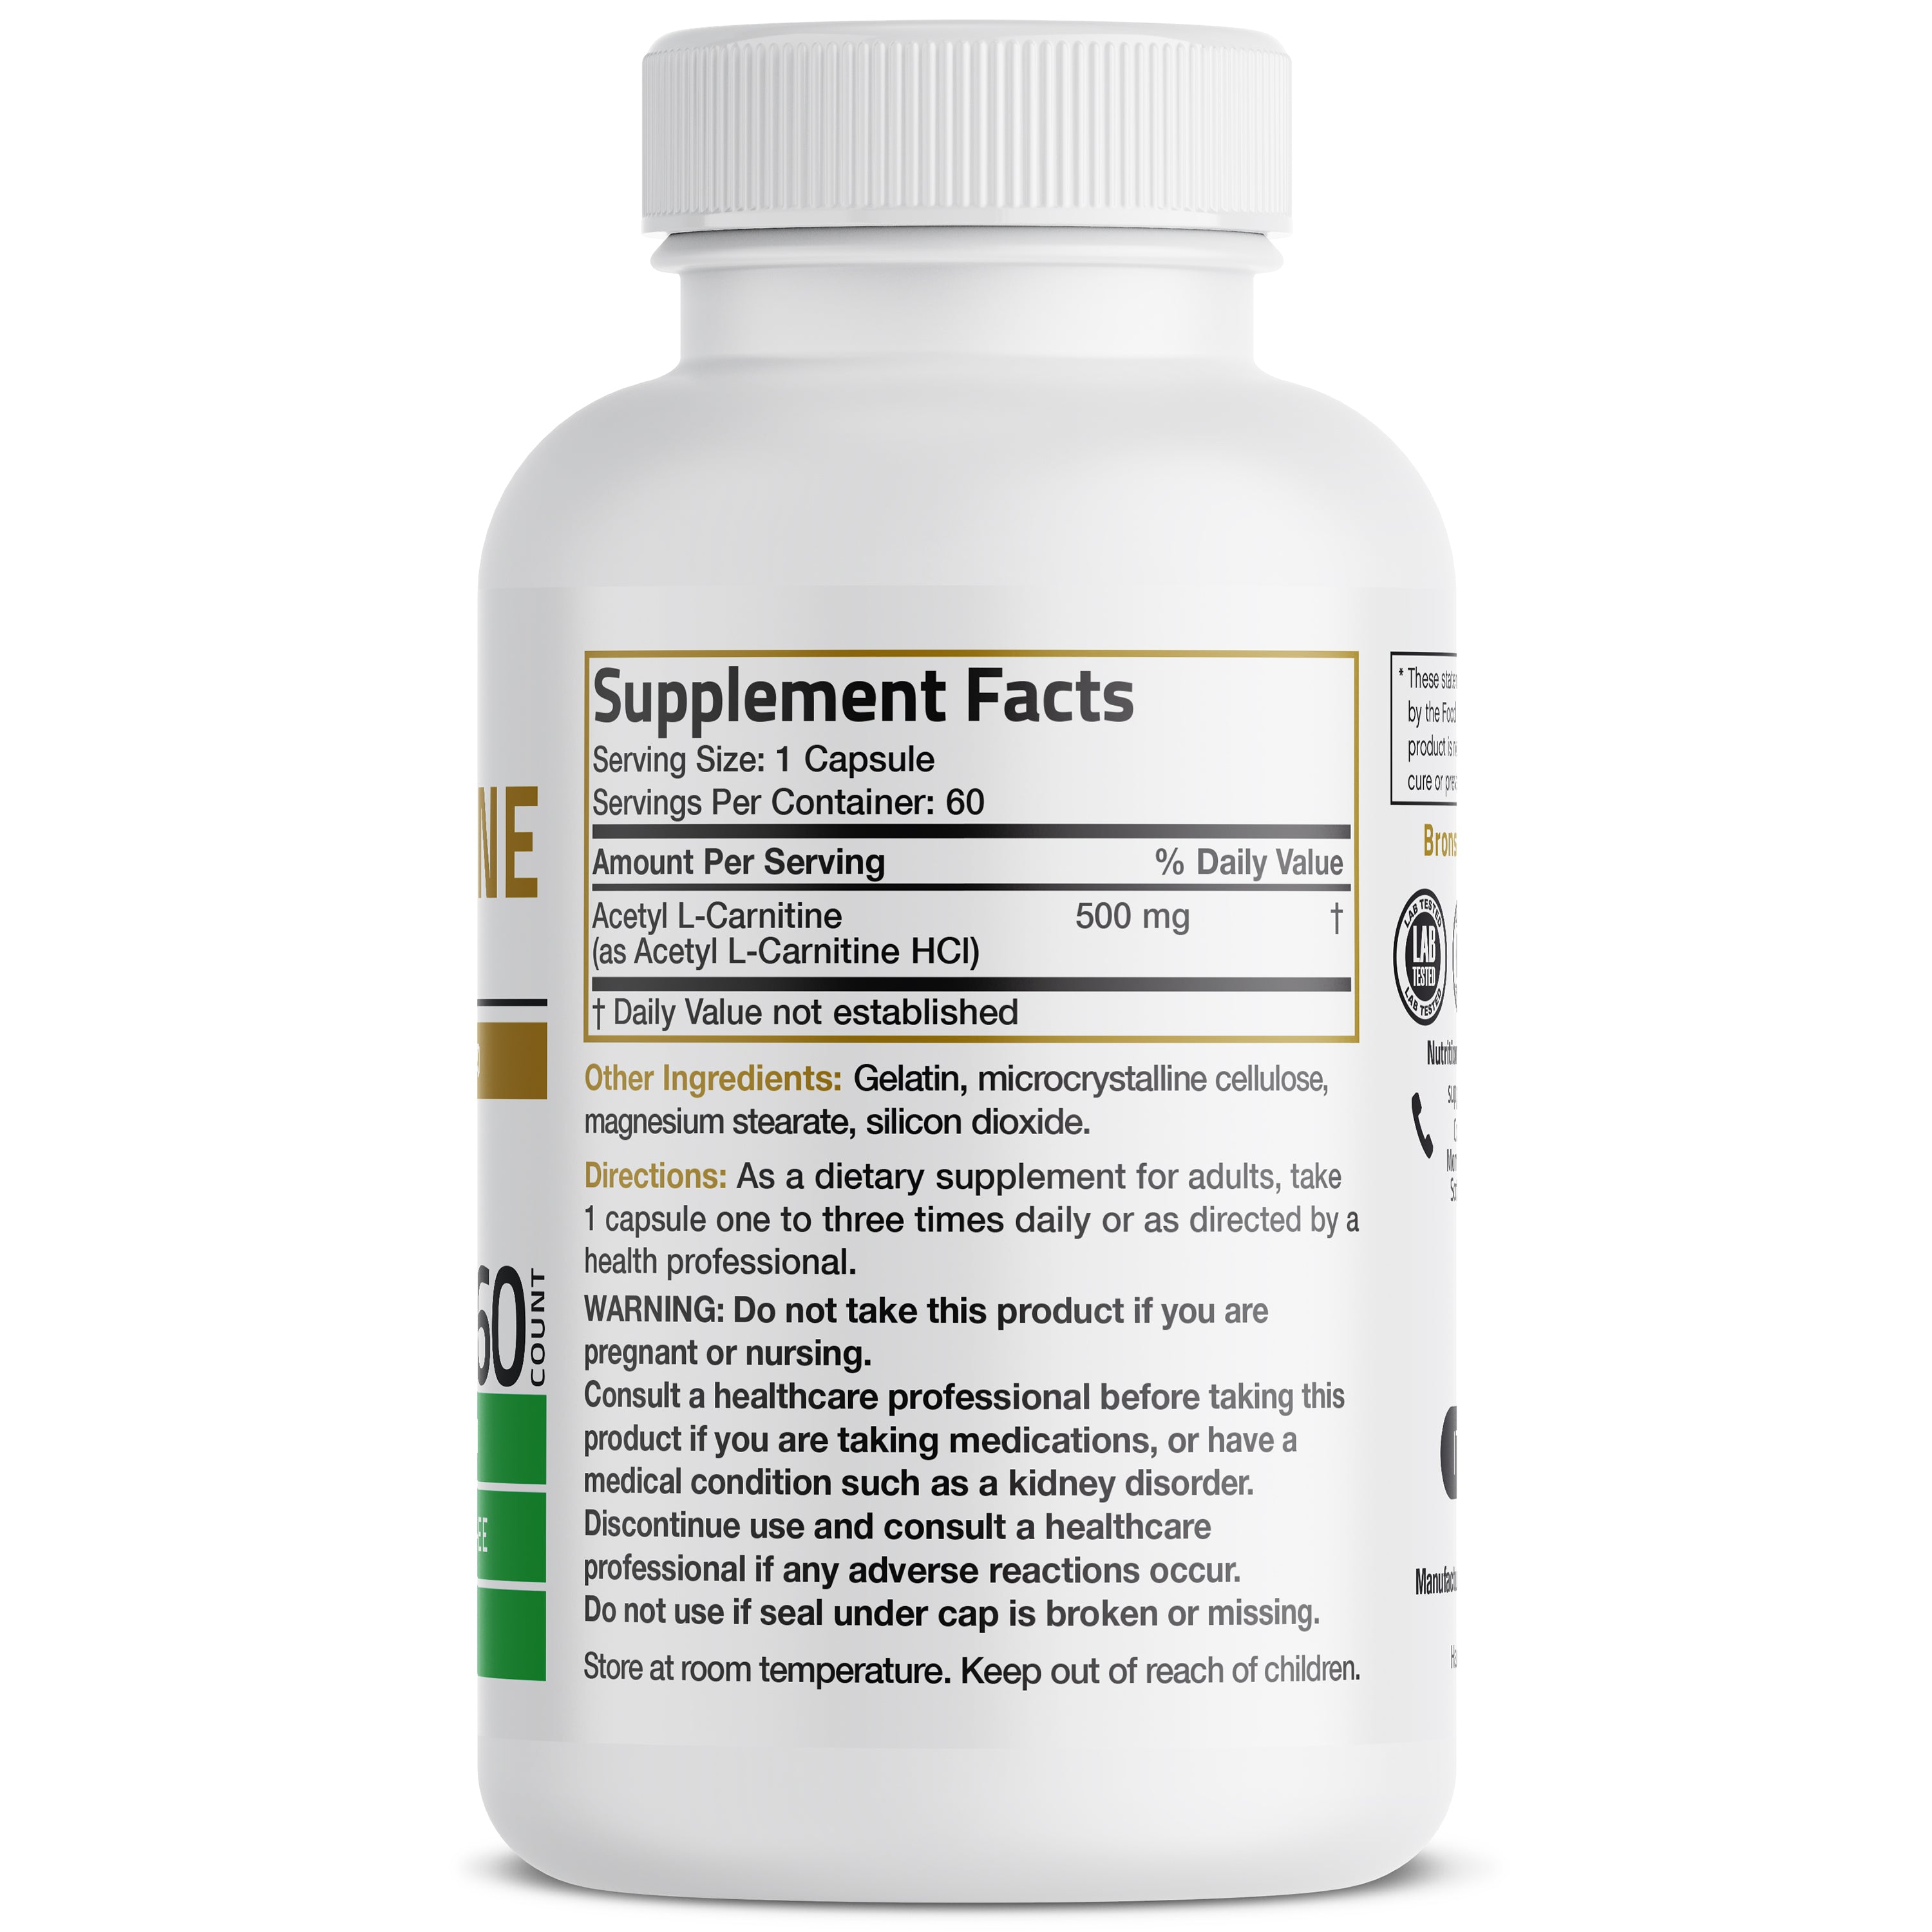 Acetyl L-Carnitine - 500 MG view 2 of 4